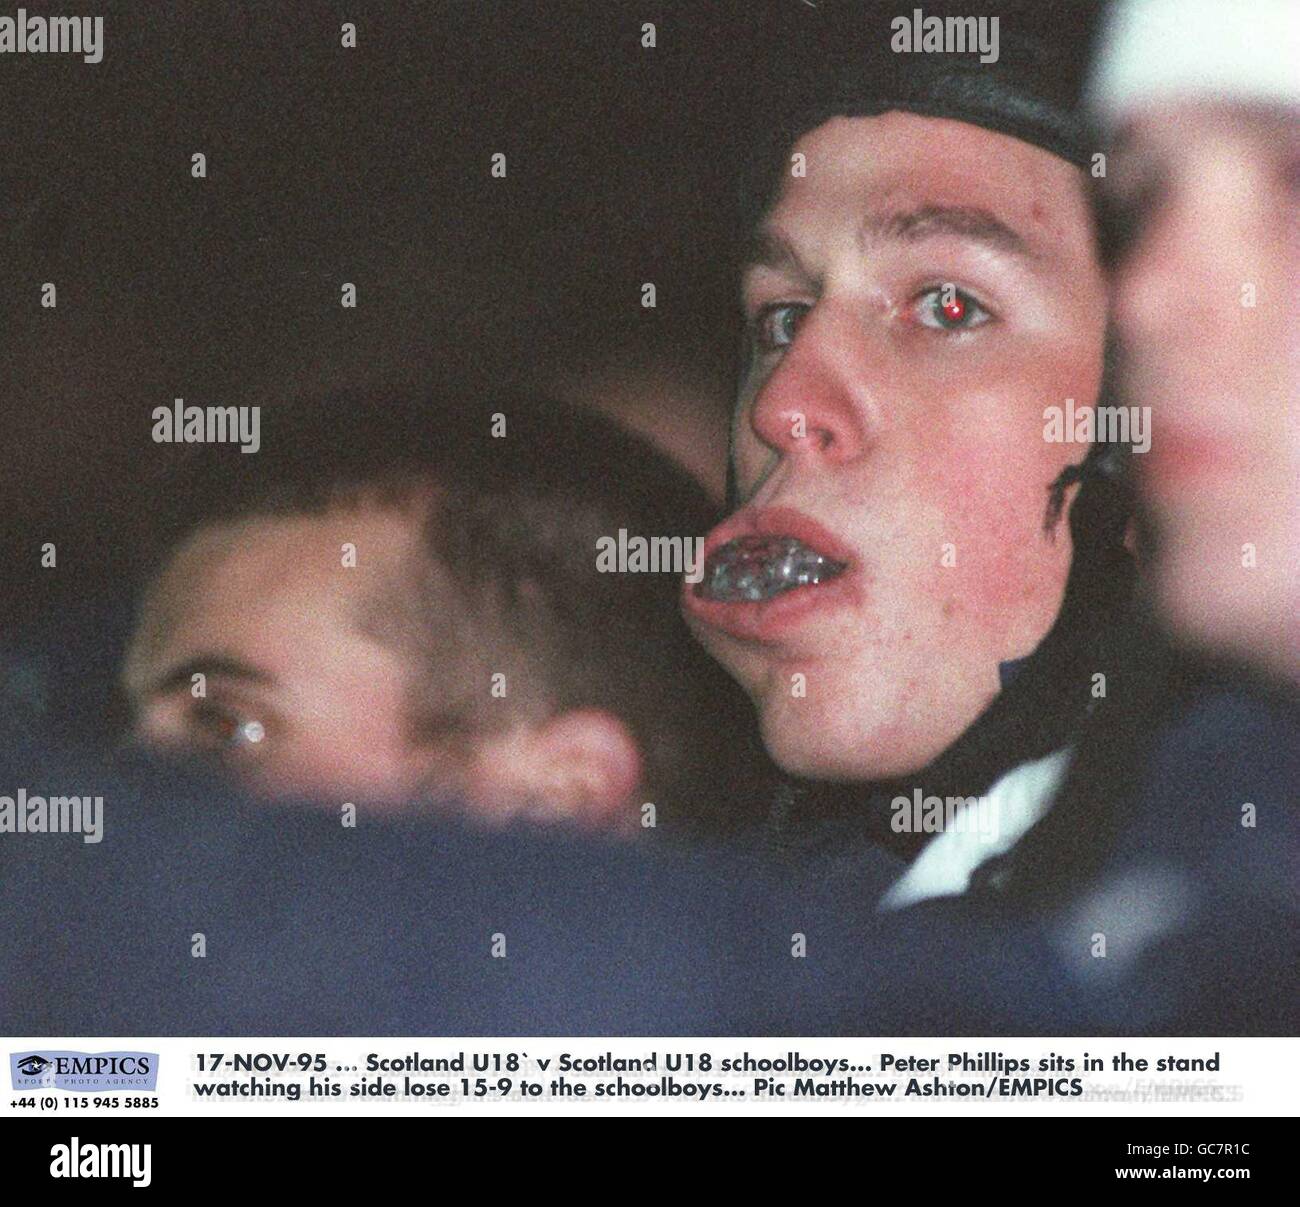 17-NOV-95. Scotland U18` v Scotland U18 schoolboys. Peter Phillips sits in the stand watching his side lose 15-9 to the schoolboys Stock Photo